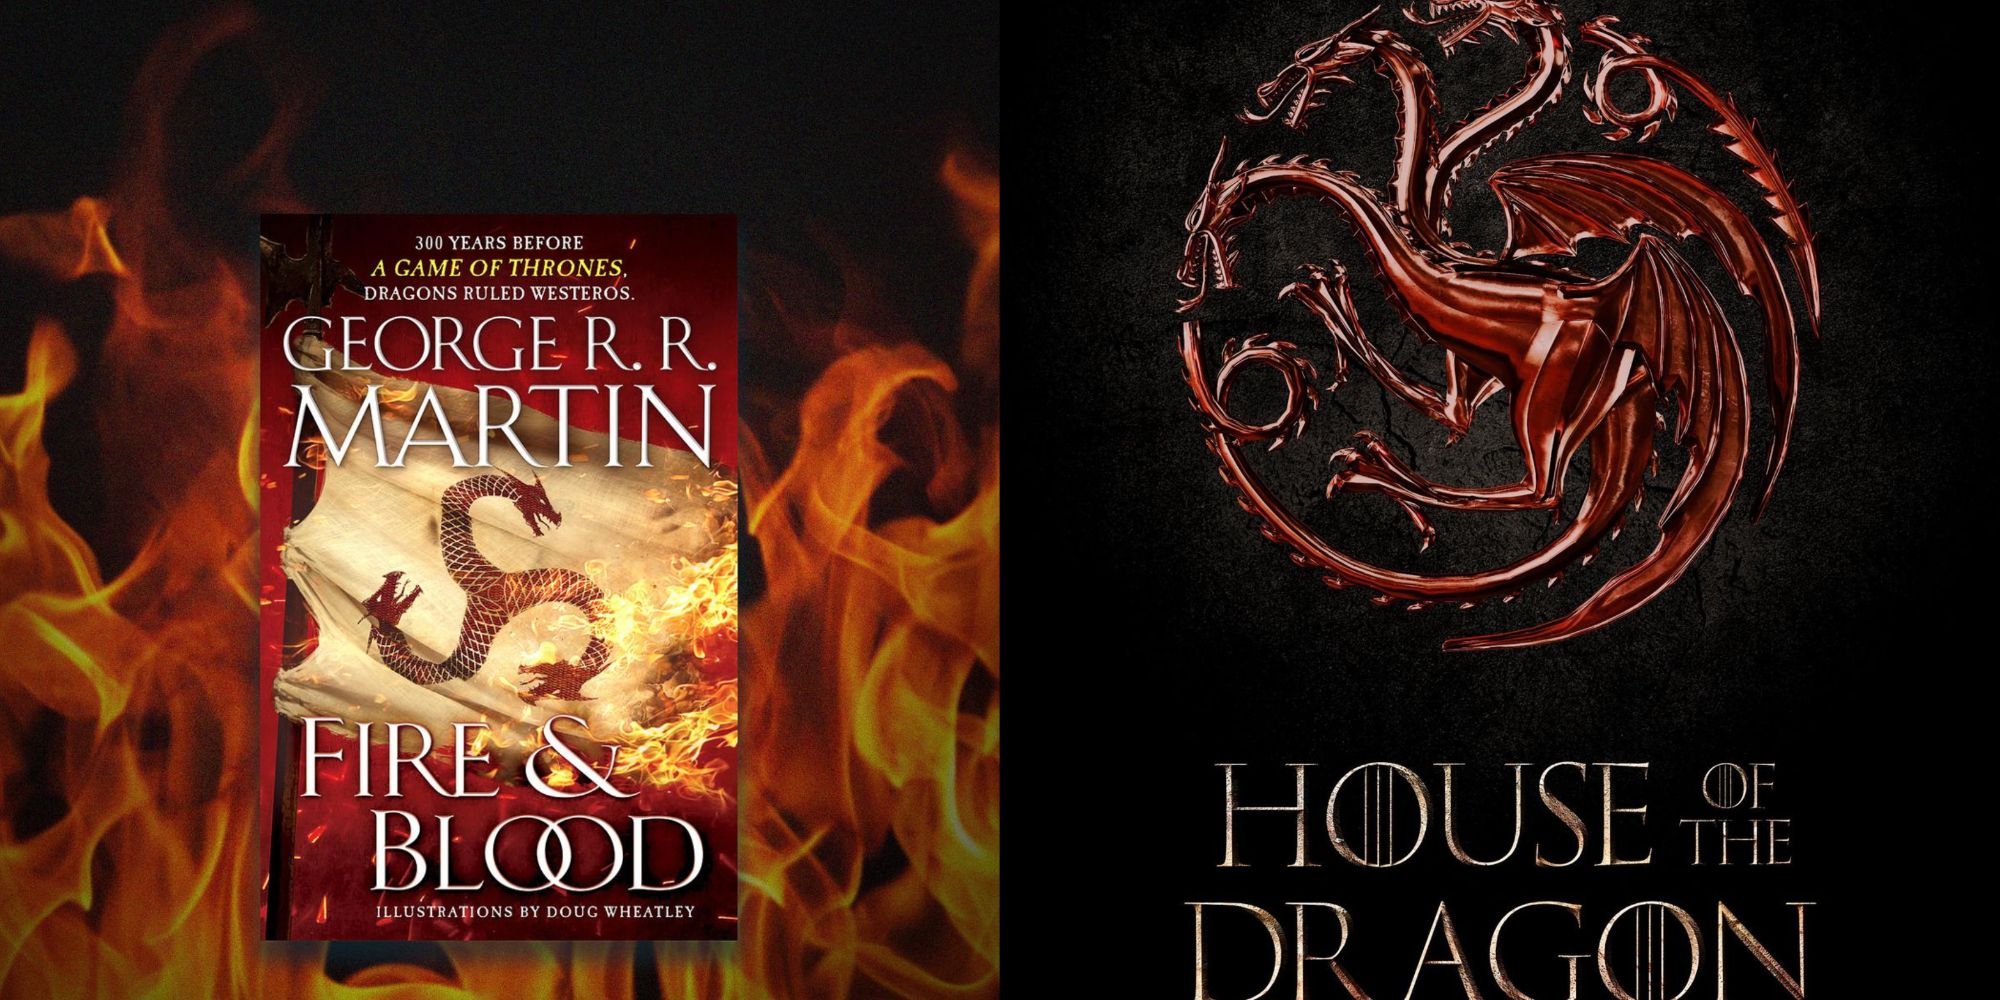 Fire and Blood cover art and House of the dragon cover